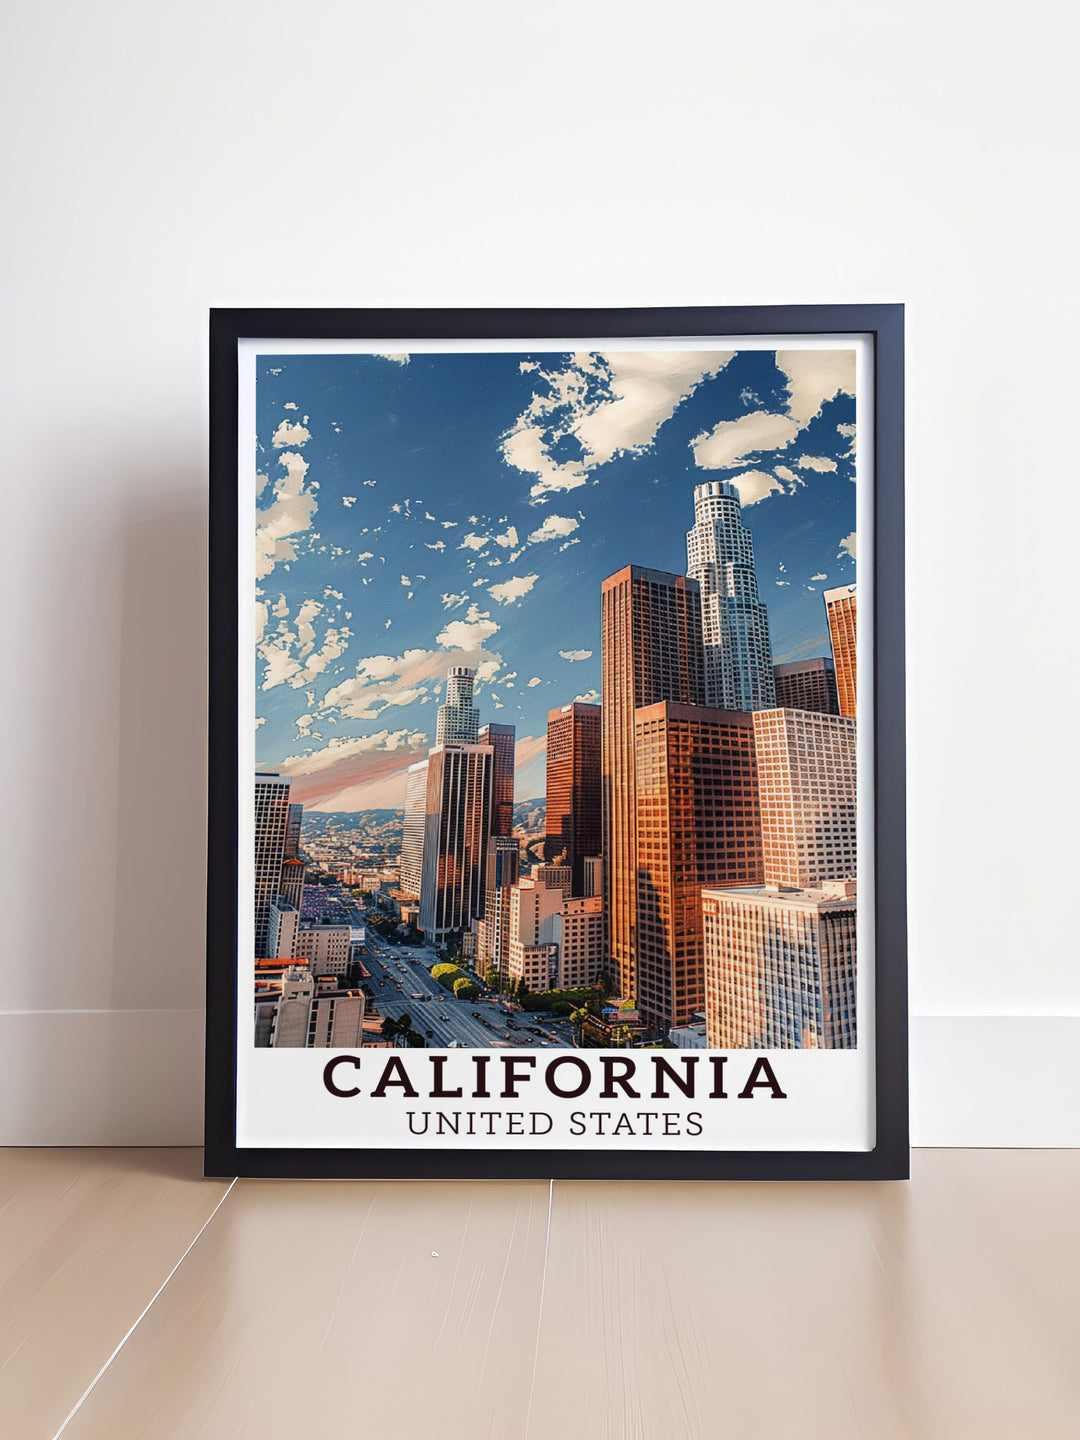 Stunning Los Angeles poster ideal for home decor and travel enthusiasts showcases the citys dynamic skyline and vibrant atmosphere a perfect addition to any art collection or wall display inspiring dreams of future travels